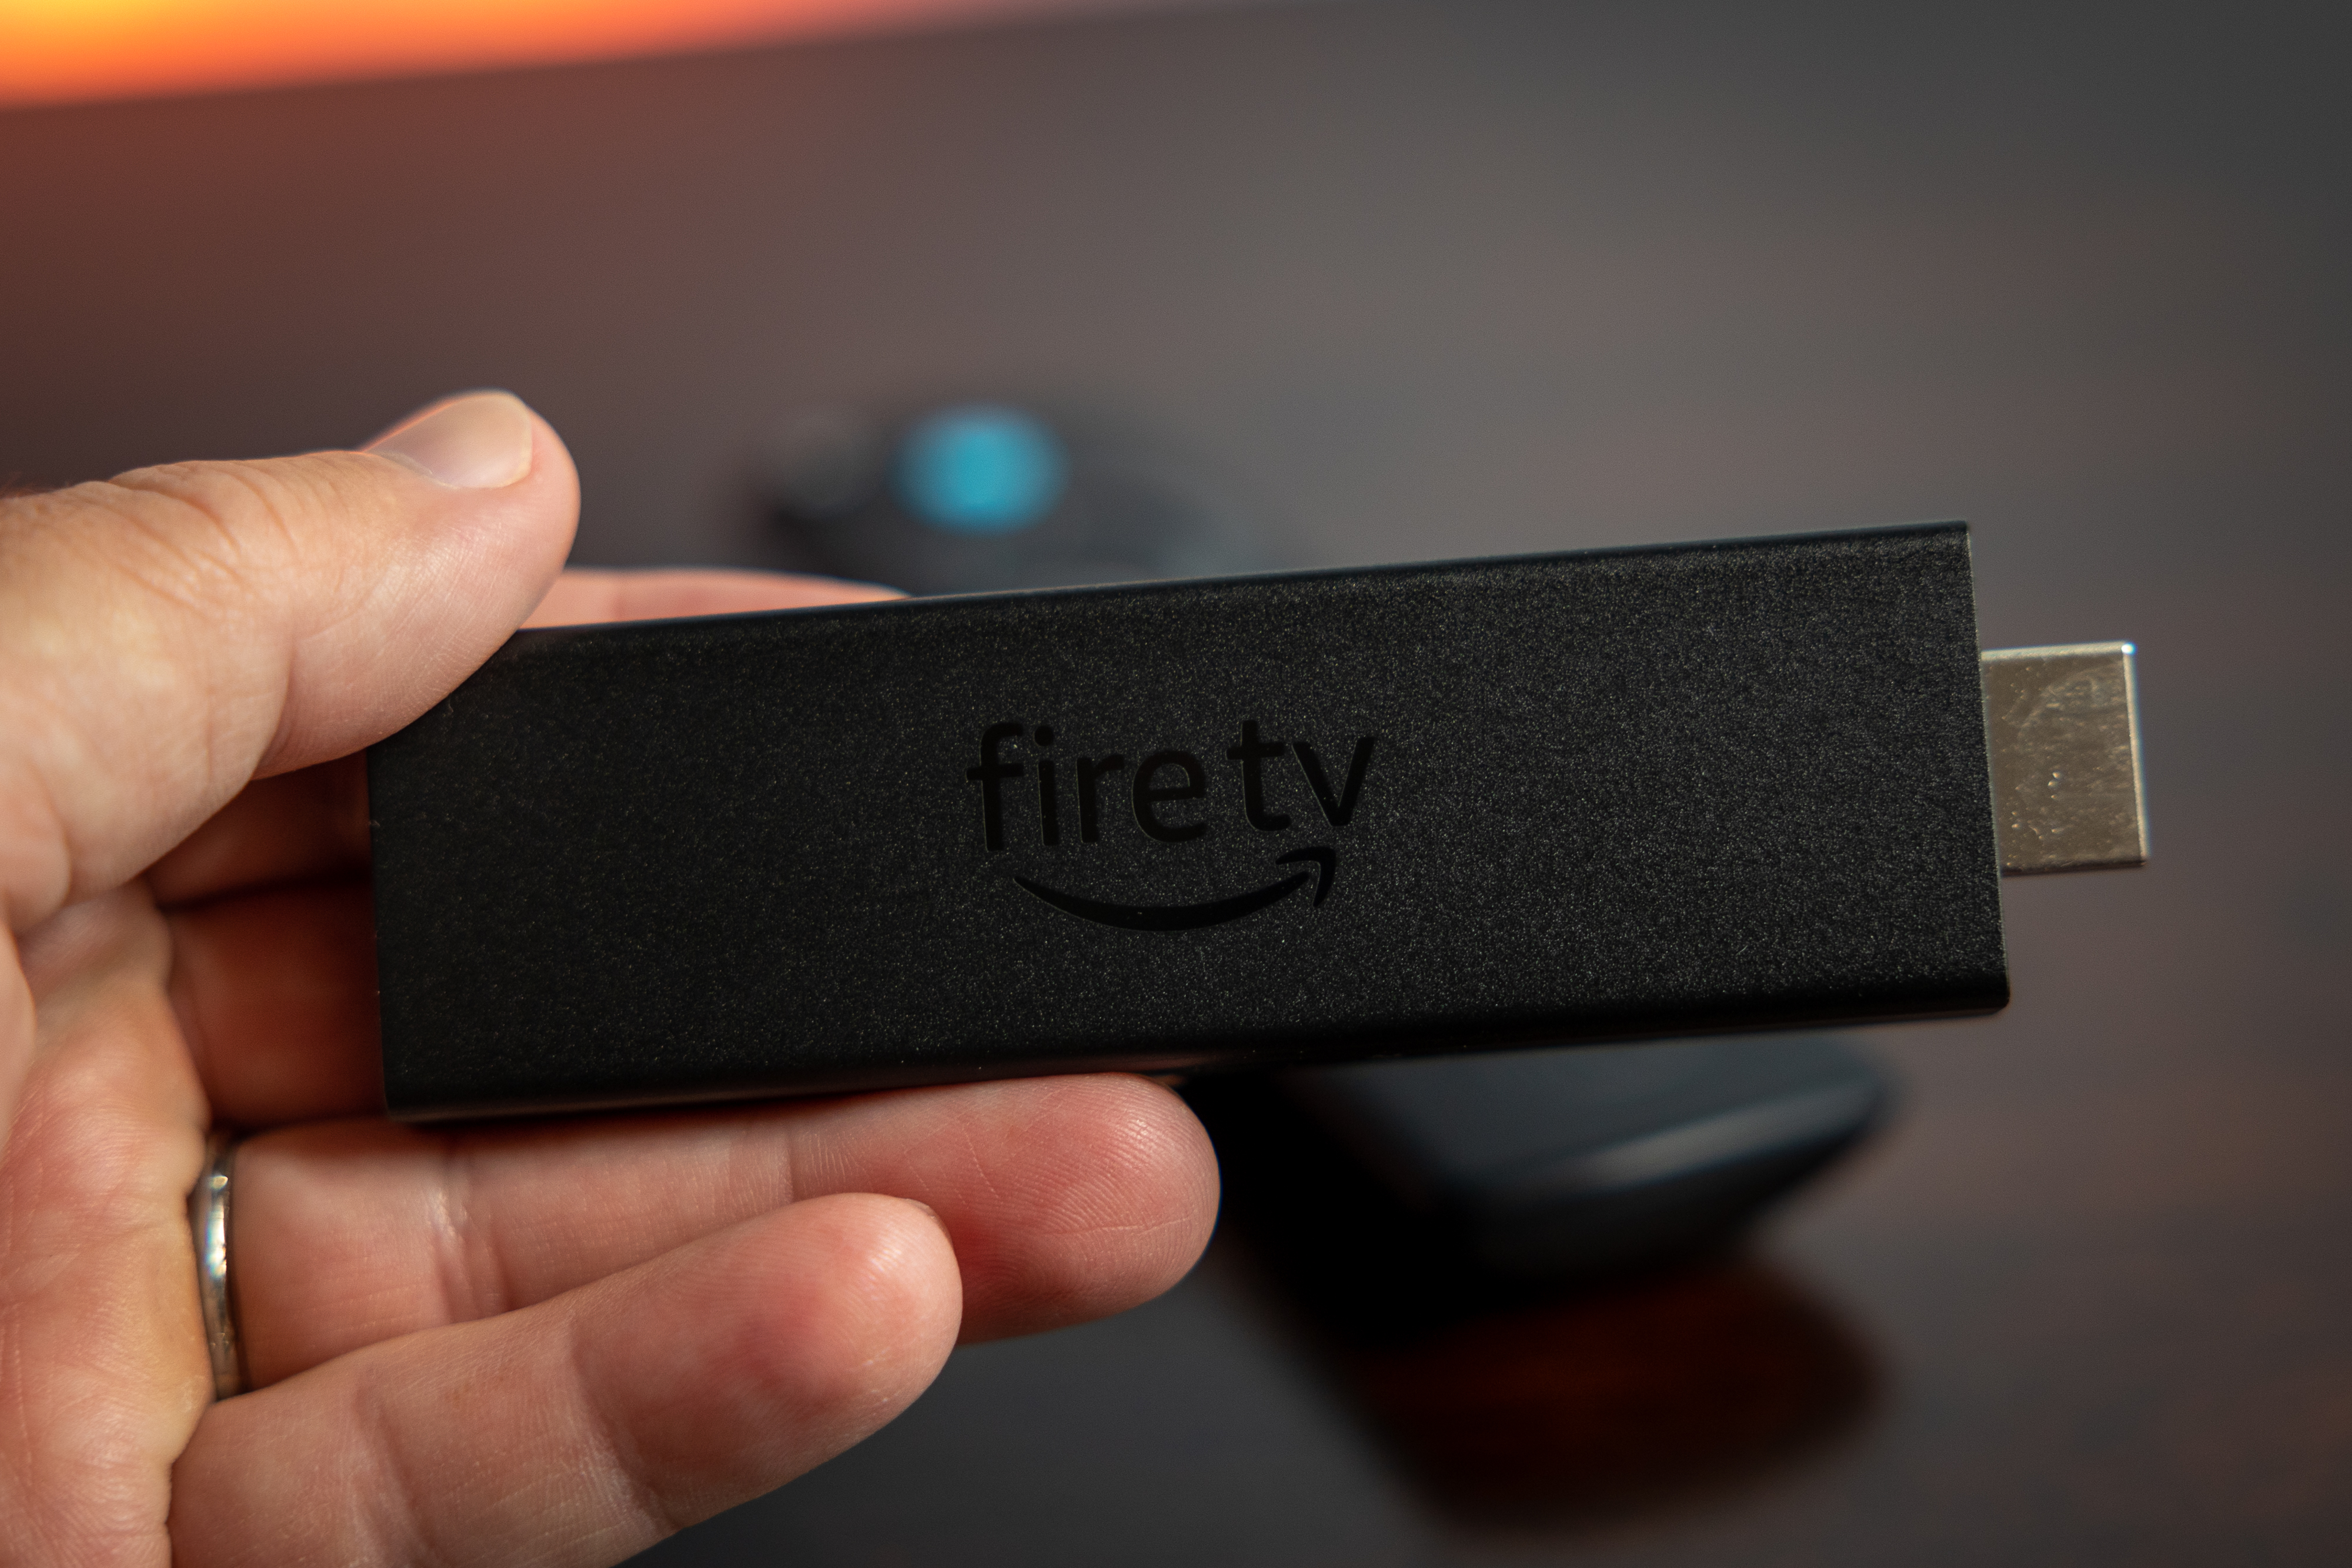 Fire Stick owners are just realizing they're missing three important  tricks that 'improve privacy' and save money